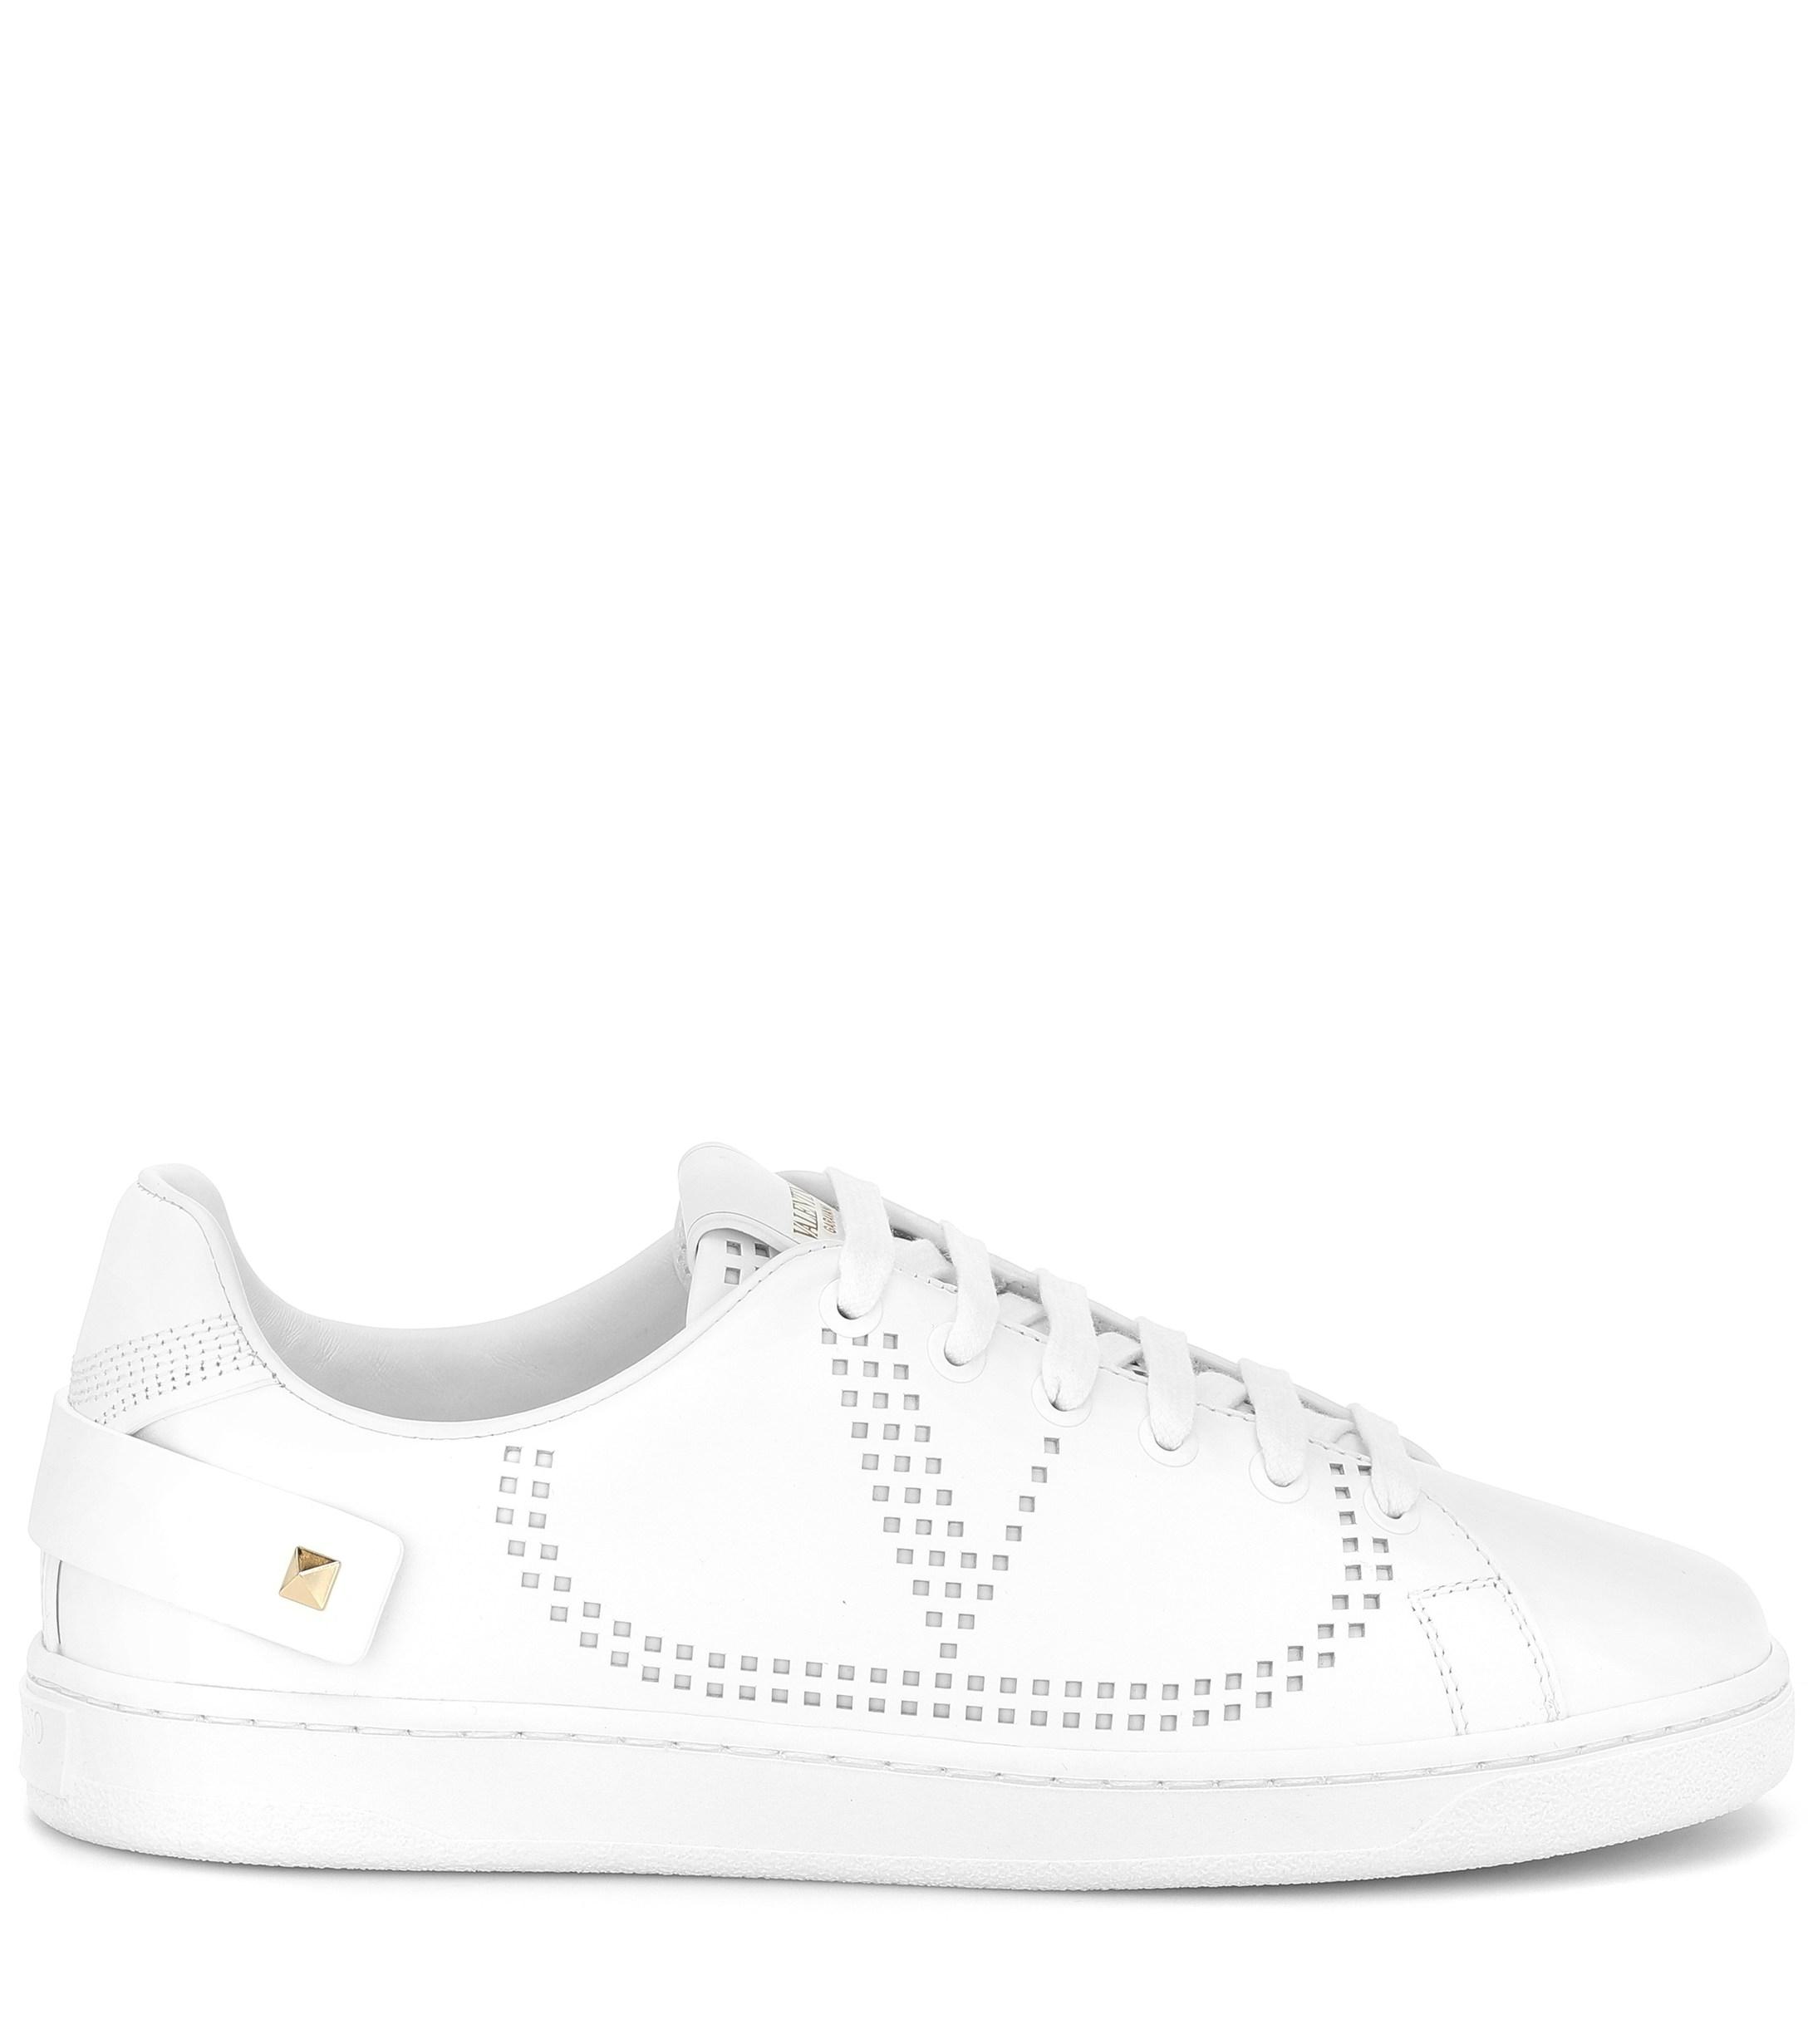 Lyst - Valentino Net Leather Sneakers in White